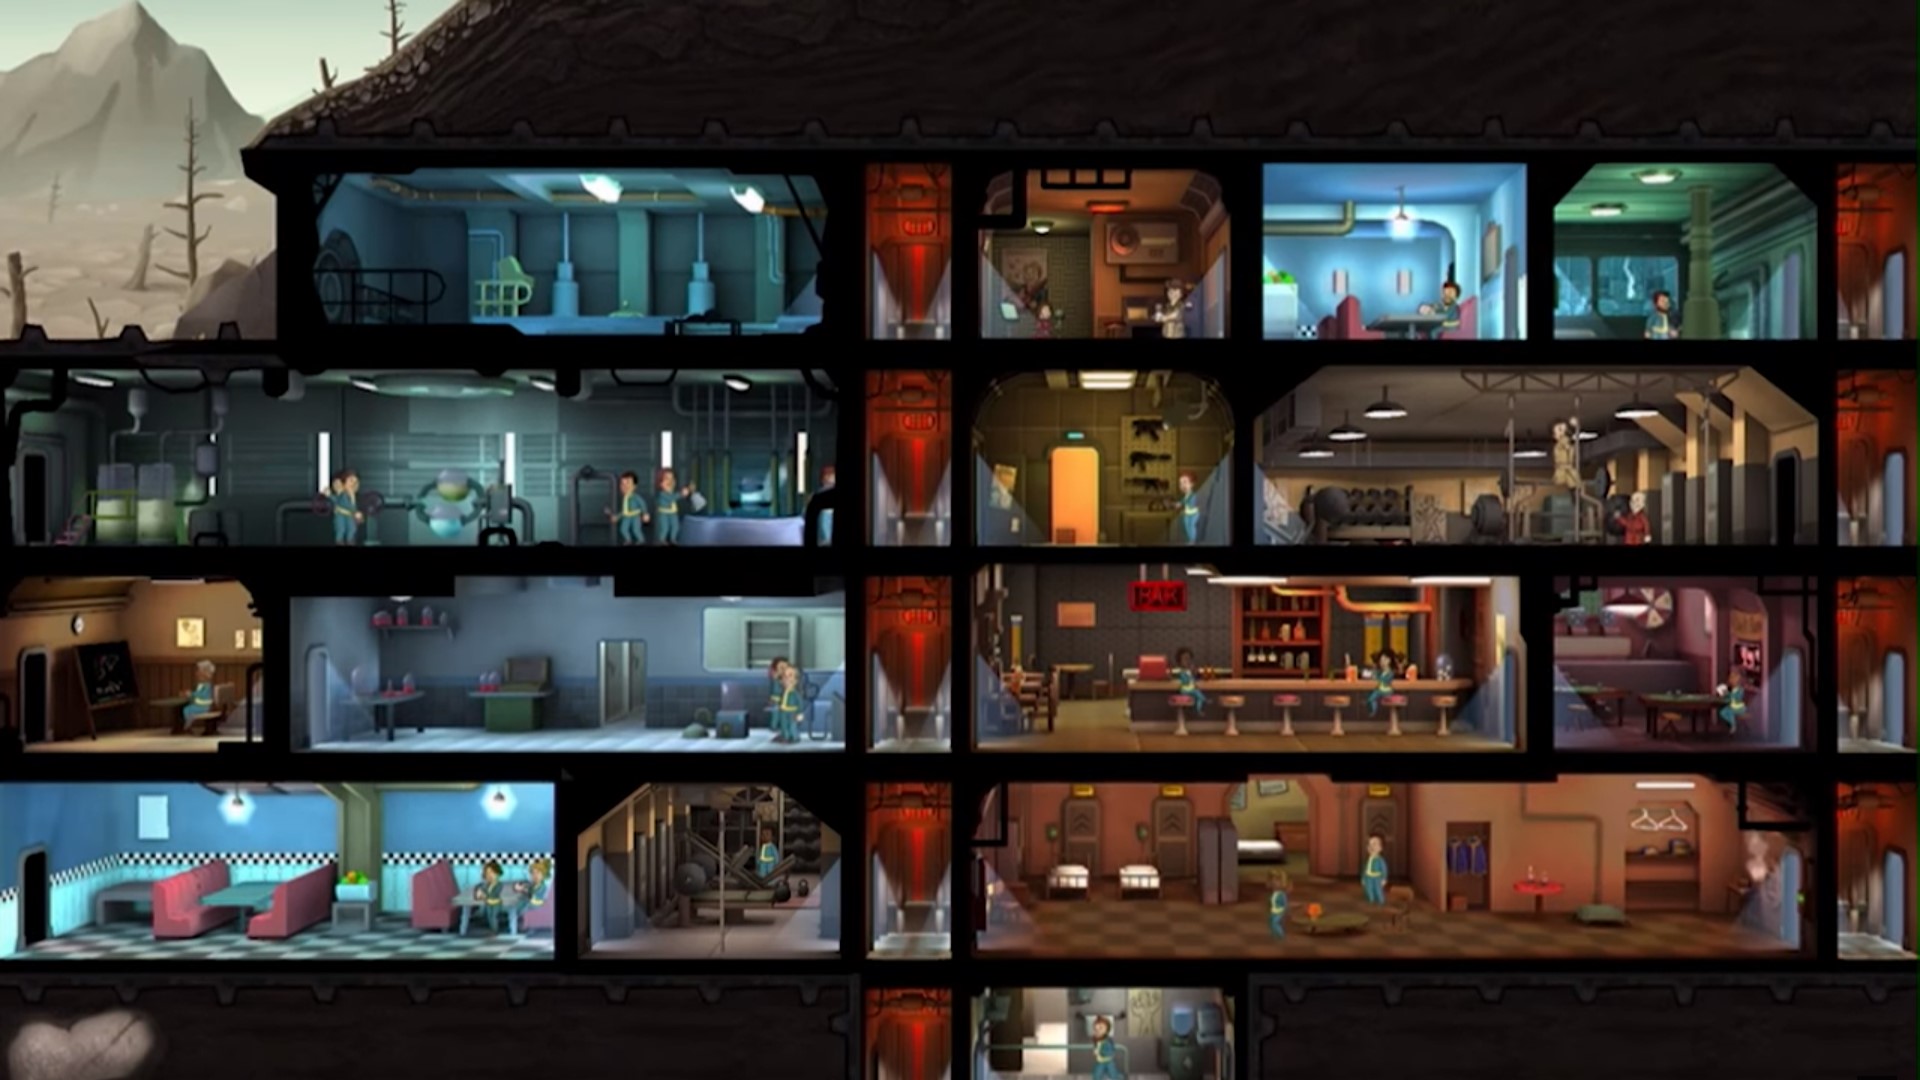 Best mobile strategy games: Fallout Shelter. Image shows a fallout shelter with many rooms and people inside it.